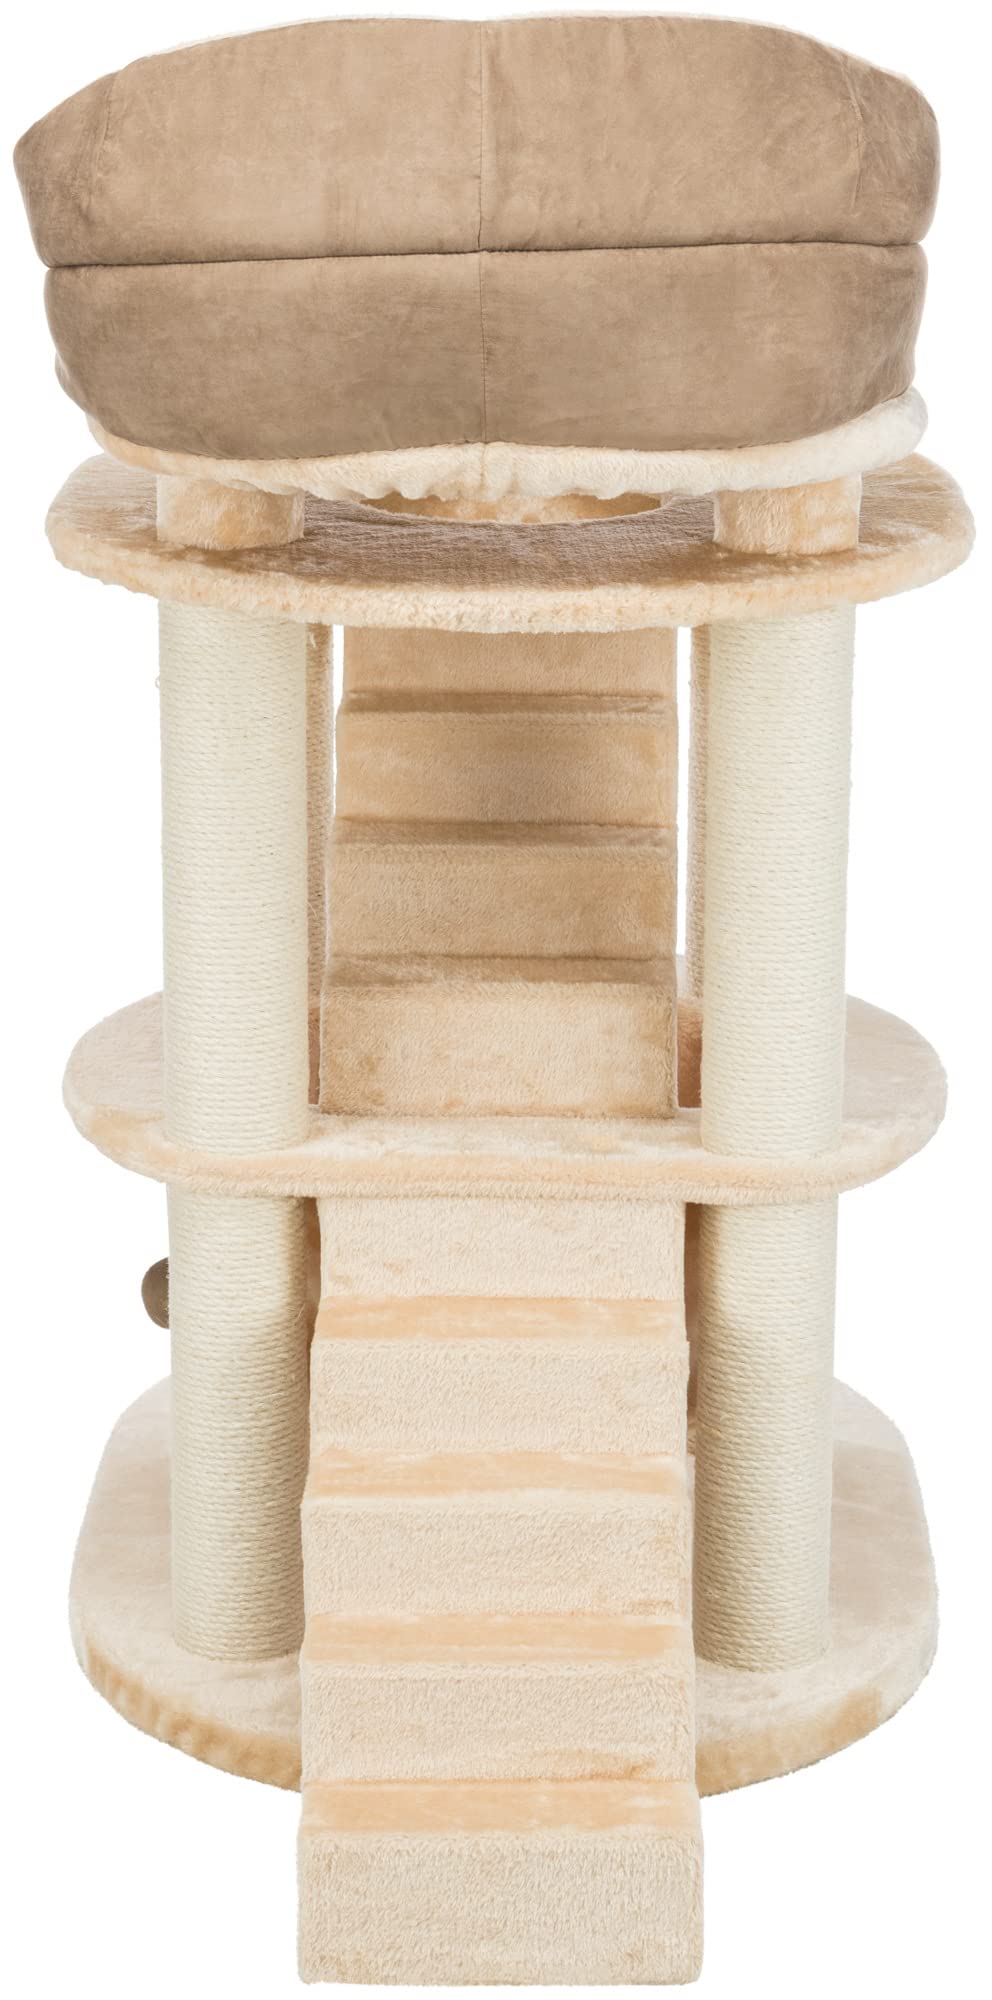 Senior Cat Tower with Scratching Posts